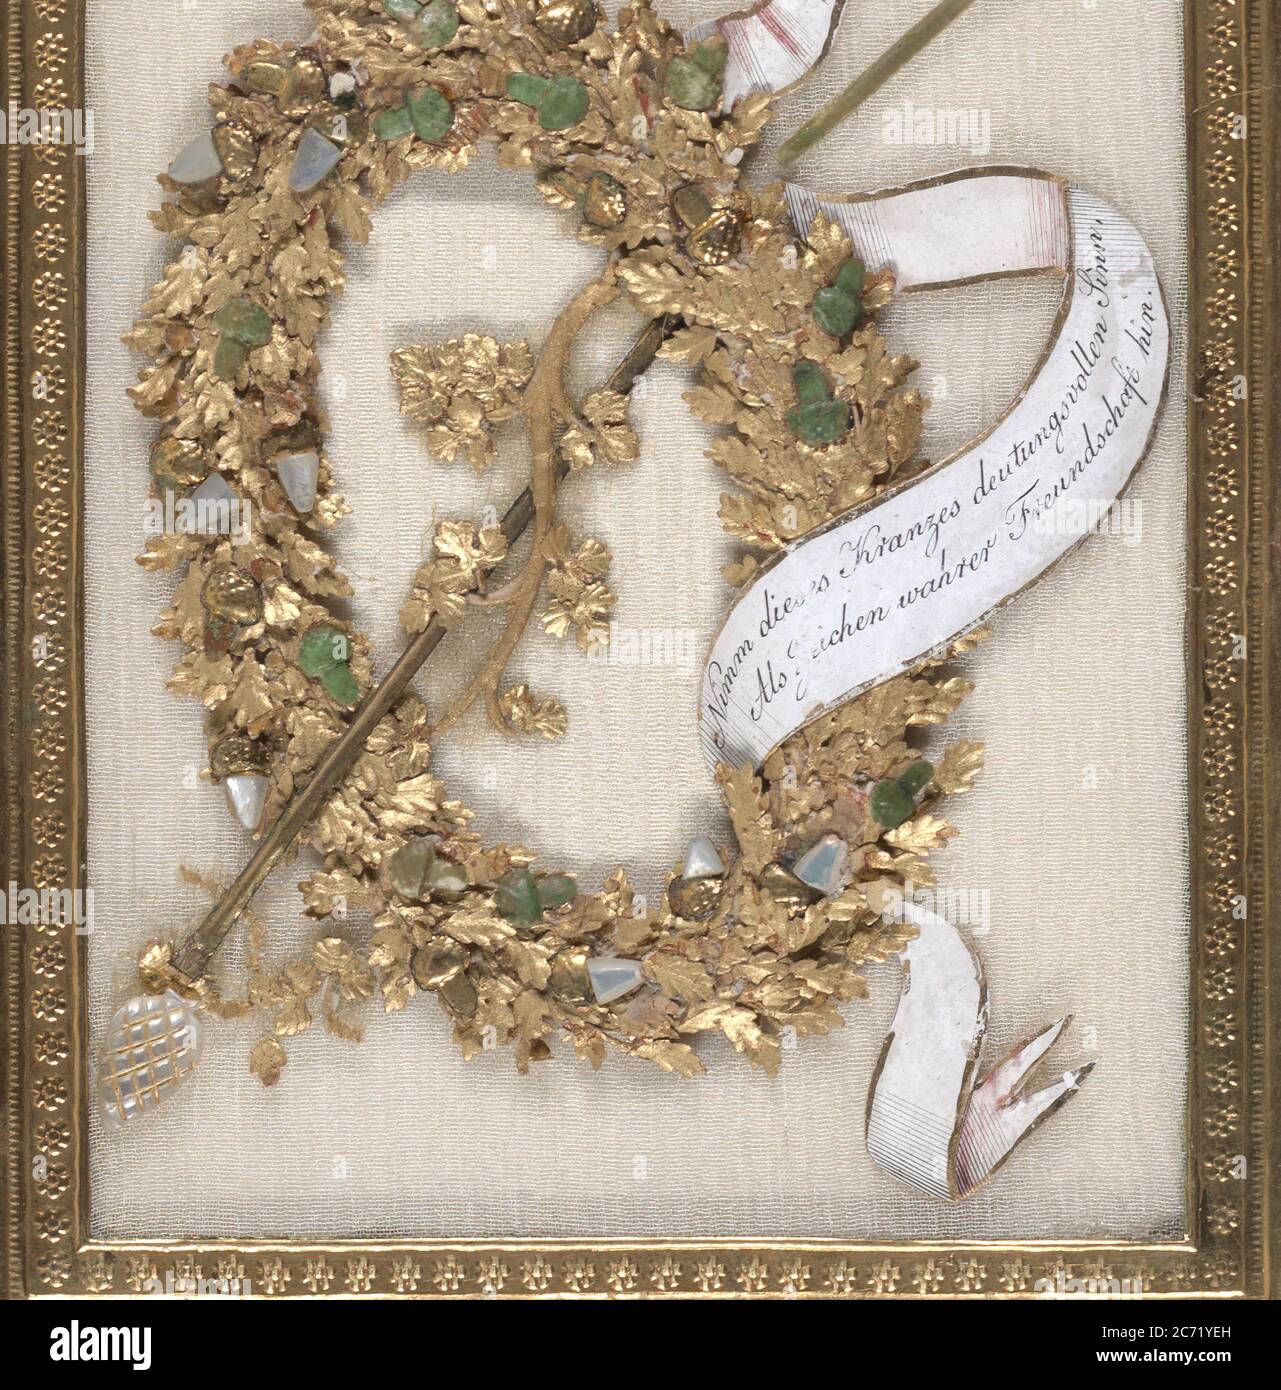 Greeting Card: wreath with acorns and oak leaves, a rod with grape vines and pearl finials; gouache, metallic paint, metallic foil, embossed and punched paper, and carved and painted mother of pearl on silk chiffon, with a gold paper border, 1810. Stock Photo